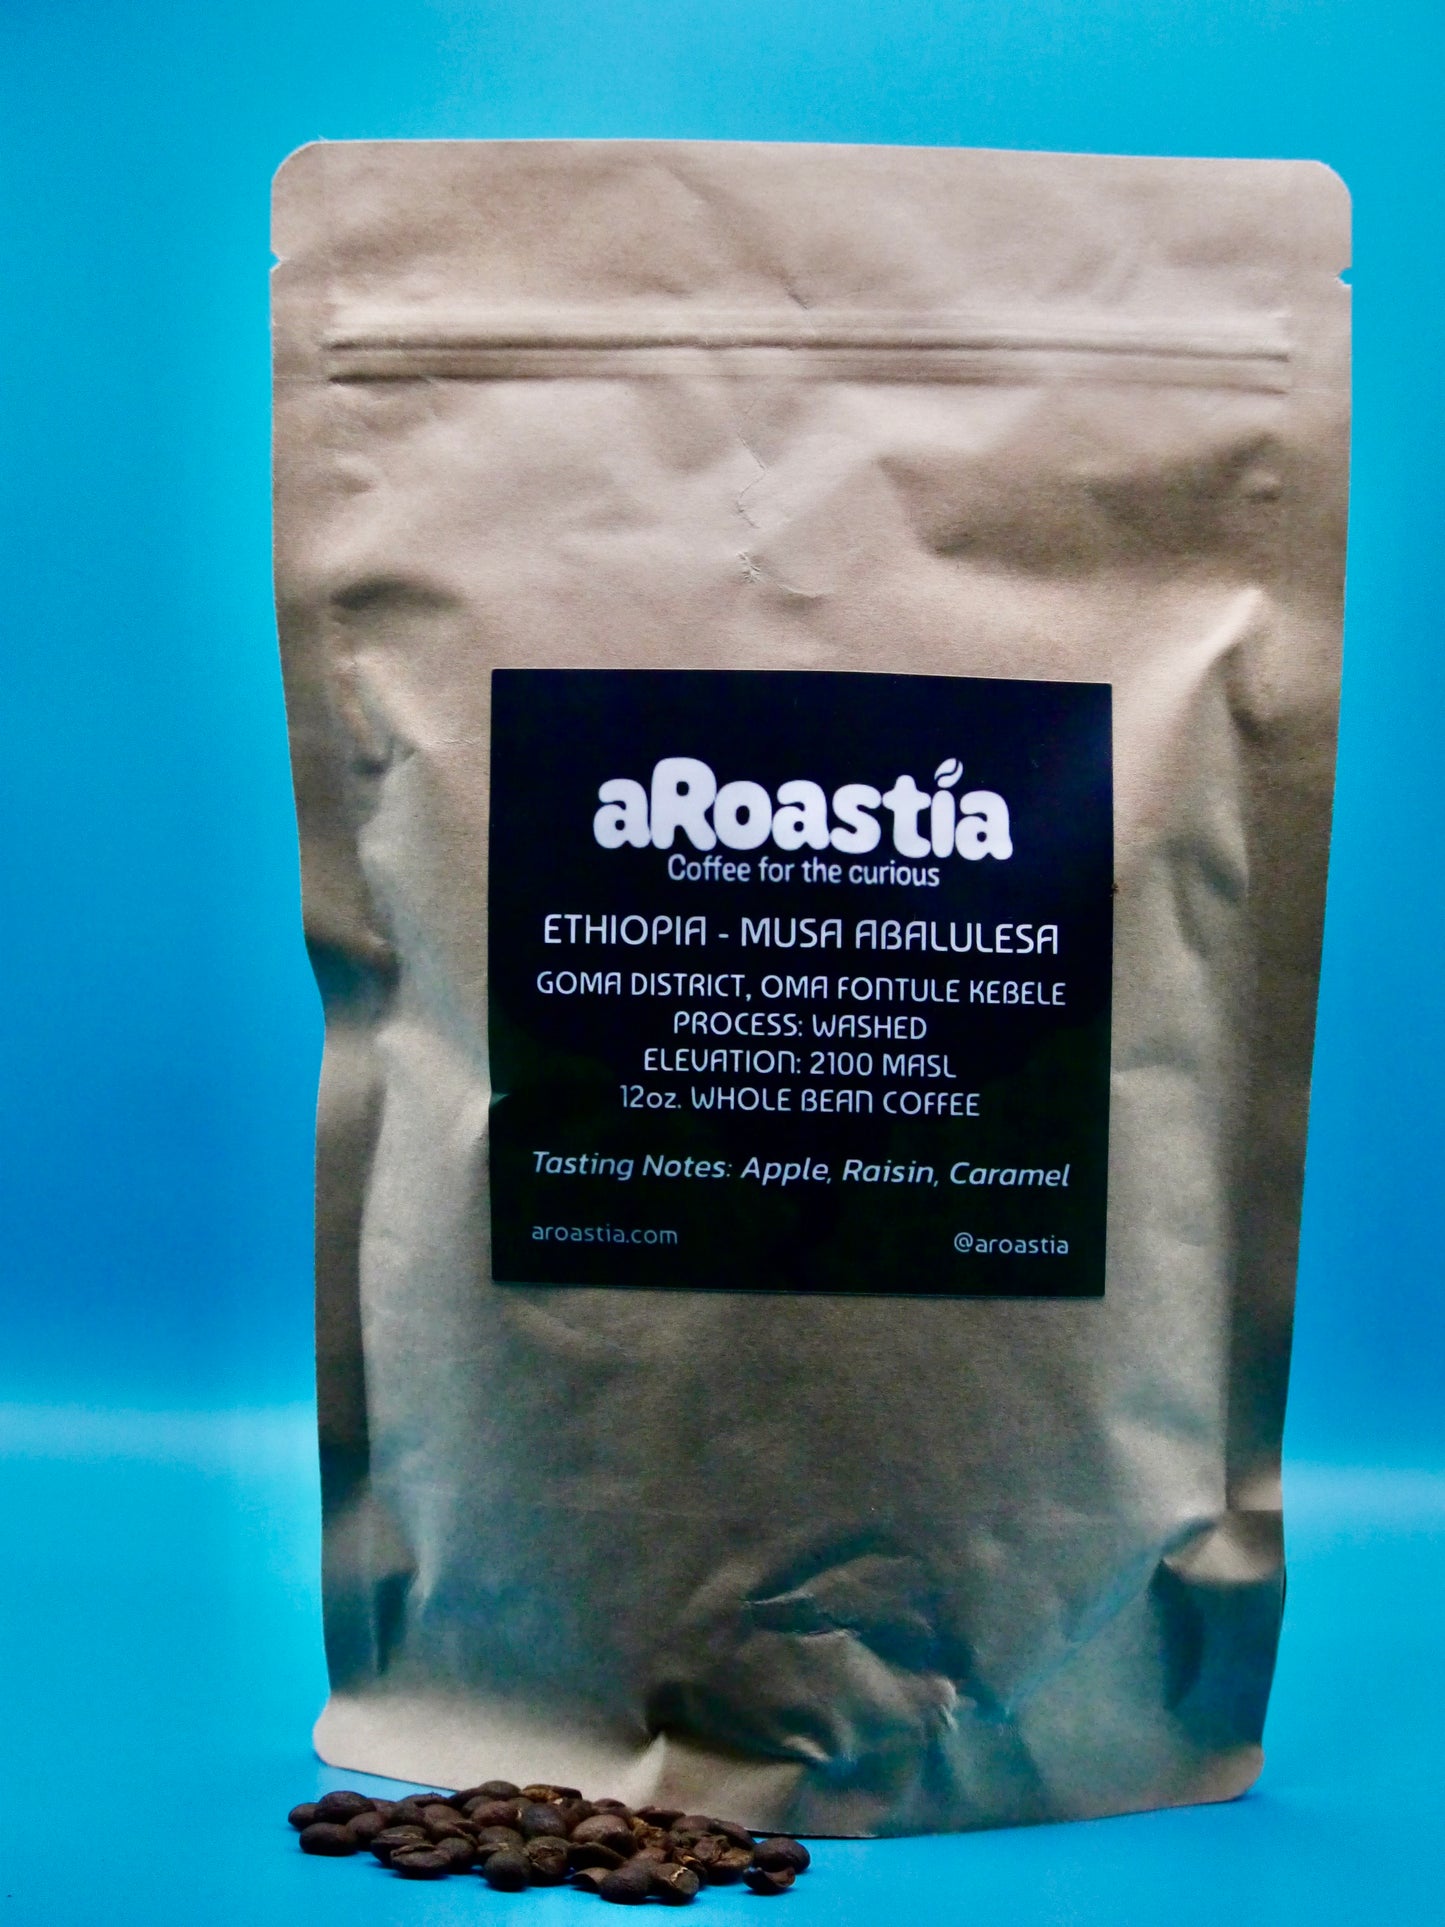 A phot of the bag of Musa Abalulesa beans that is for sale on the website, with beans poured out in front of the bag.